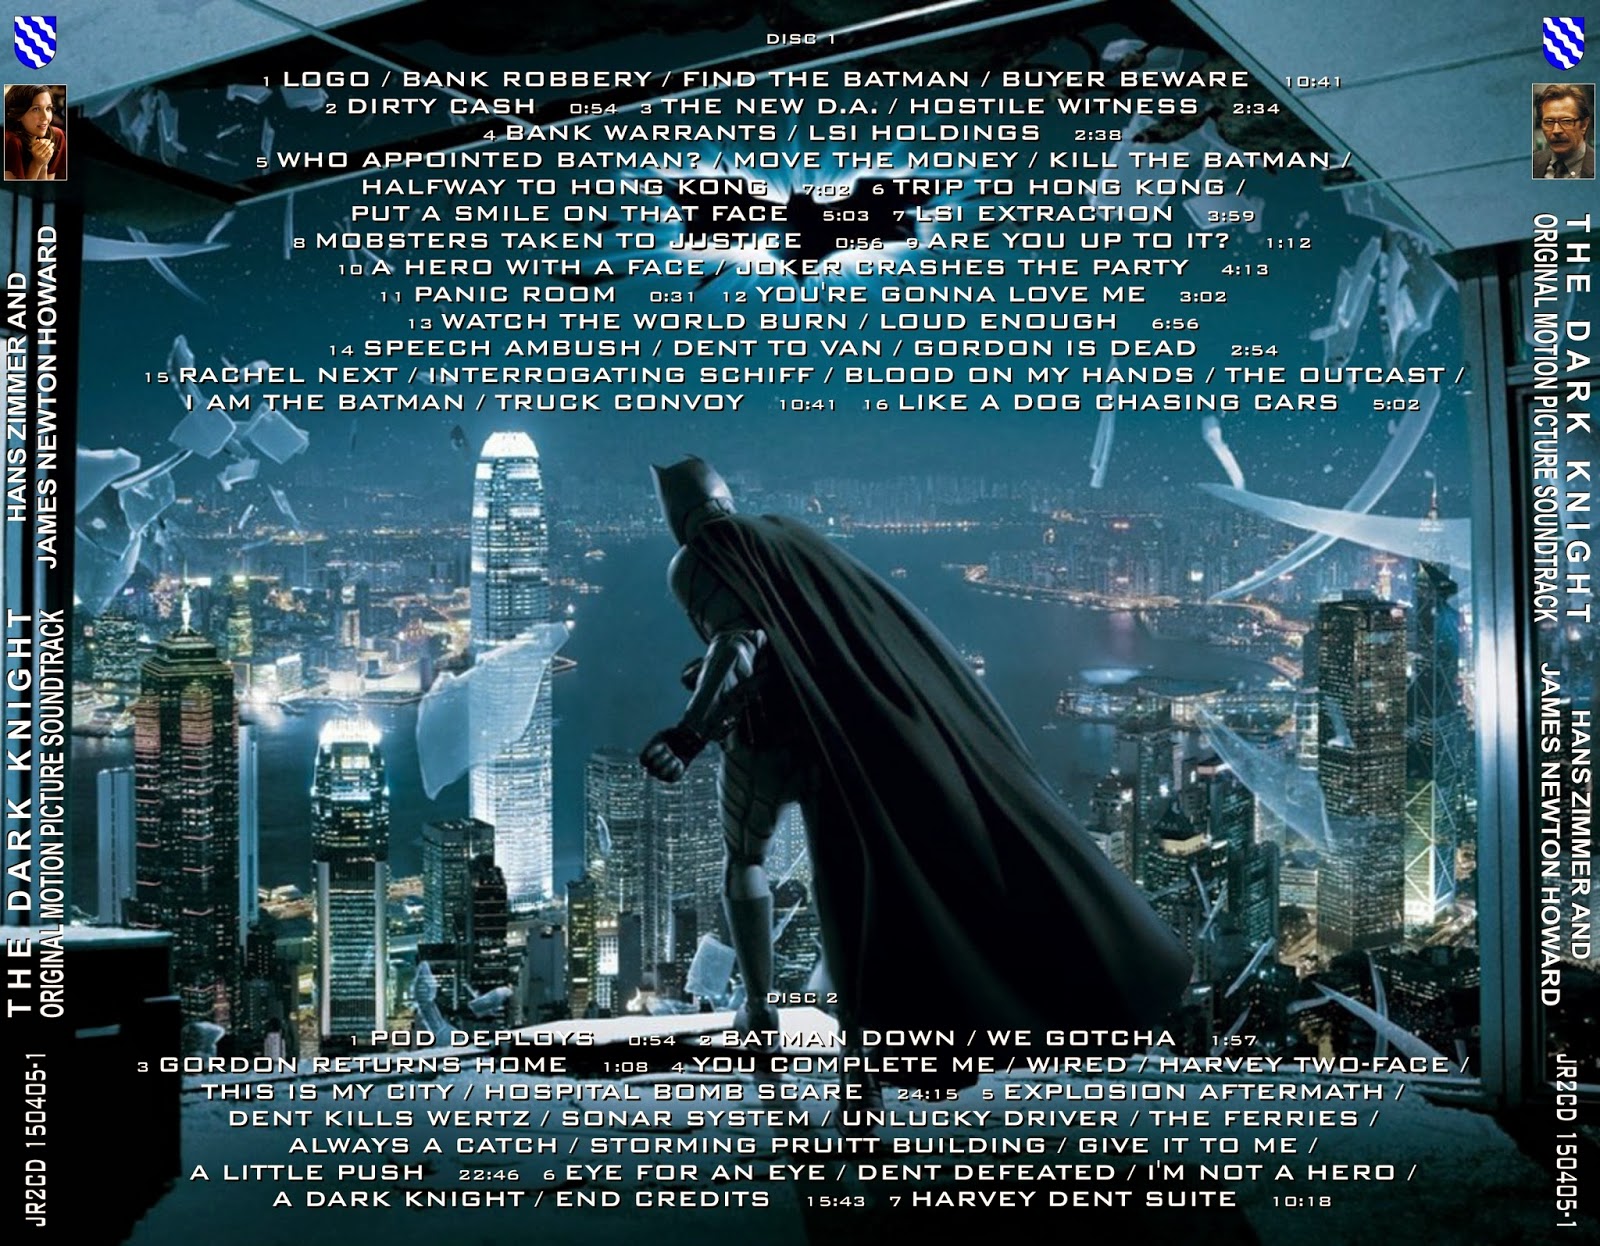 LE BLOG DE CHIEF DUNDEE: THE DARK KNIGHT Complete Score - Hans Zimmer /  James Newton Howard